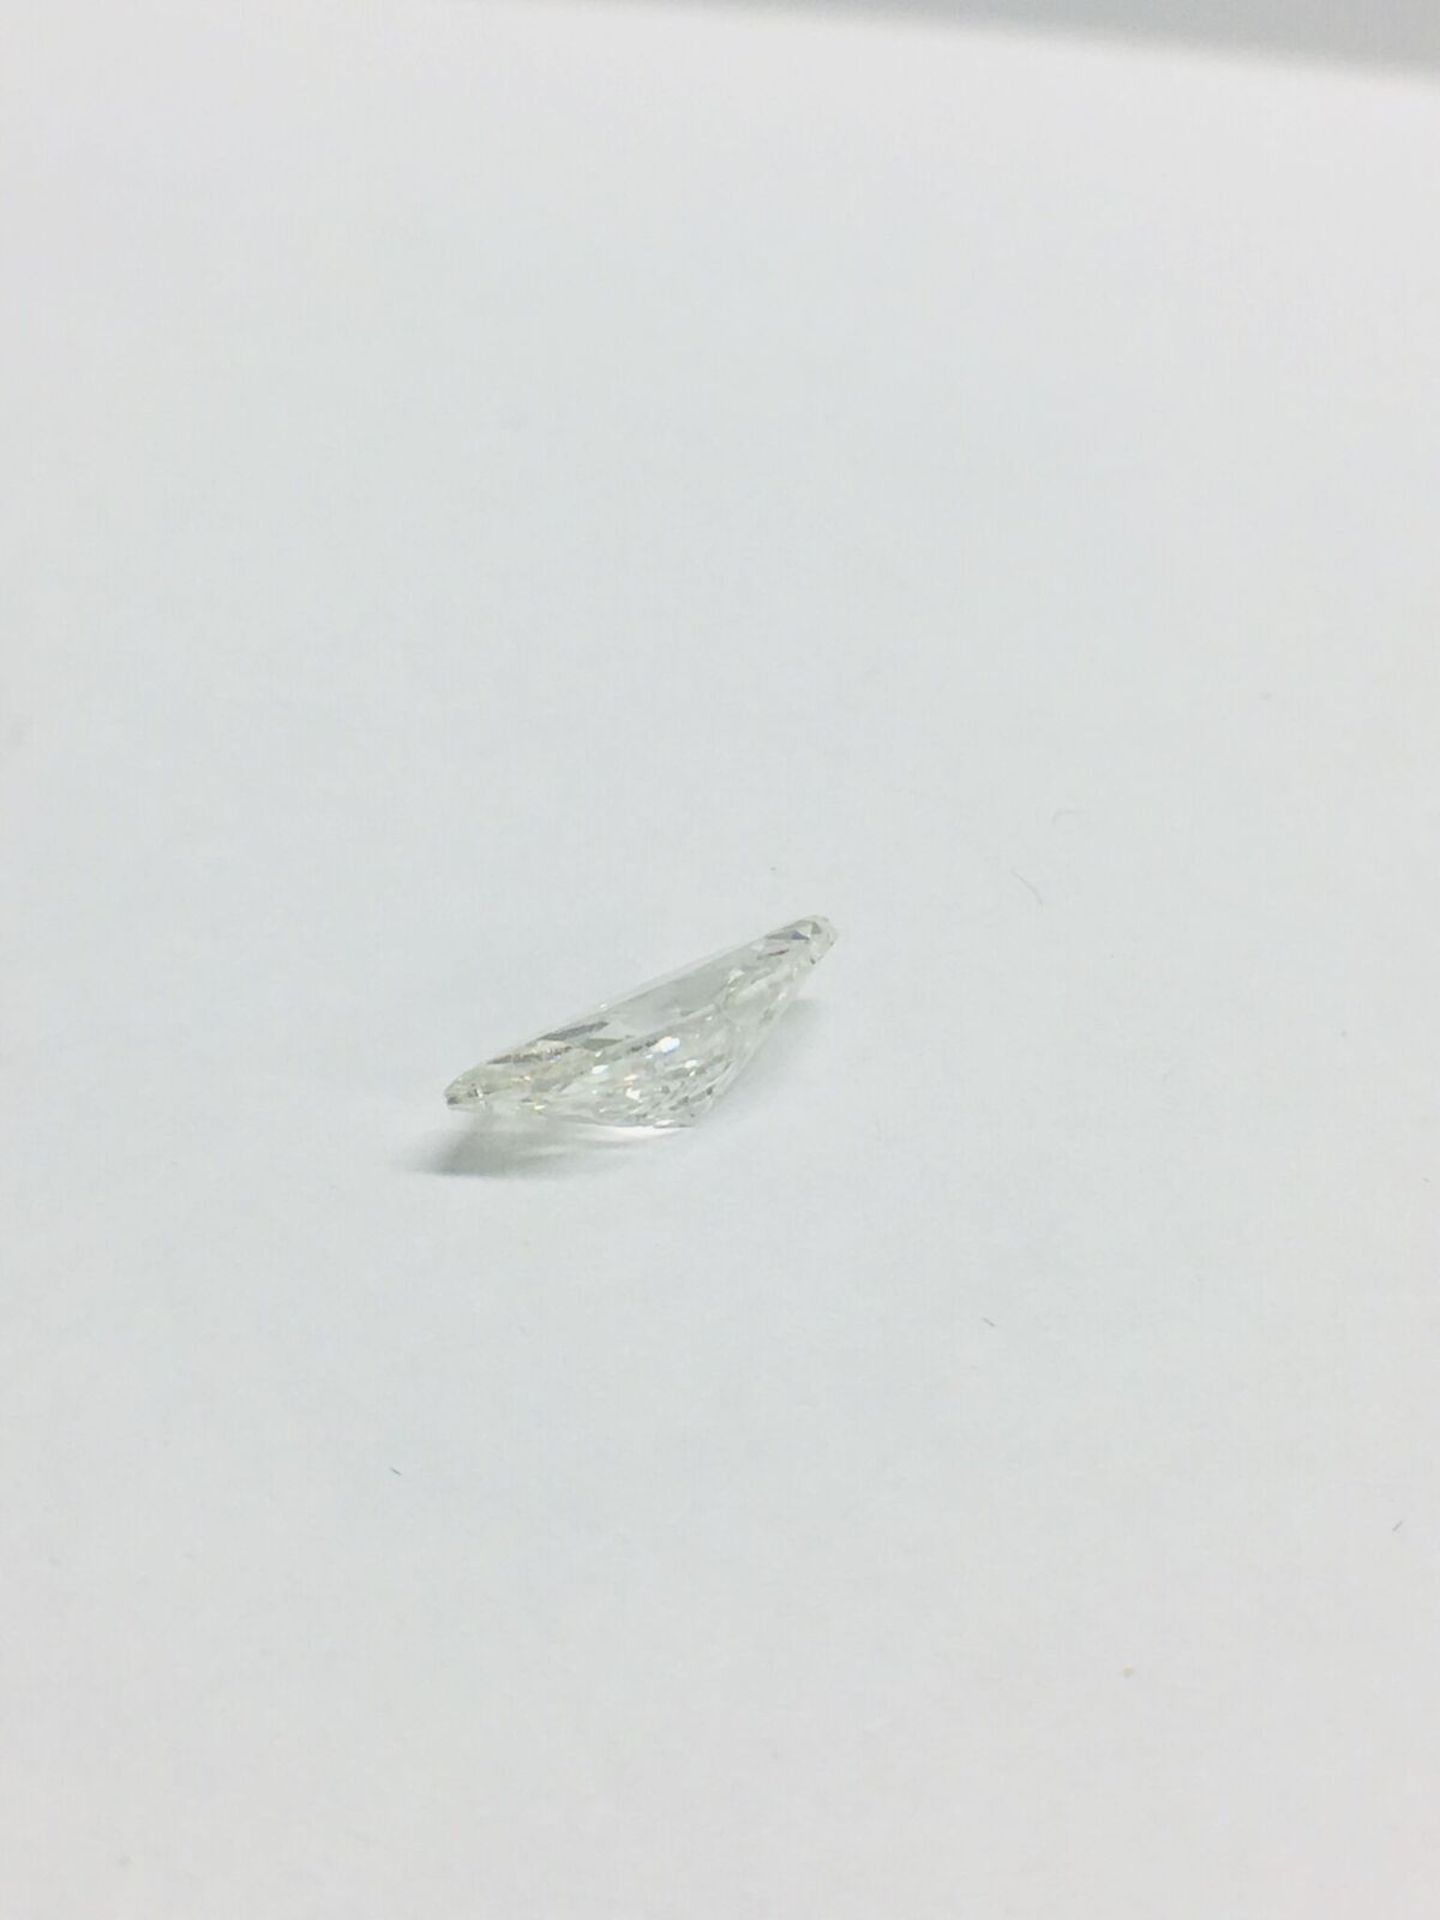 1.23Ct Marquis Cut Natural Diamond - Image 4 of 5